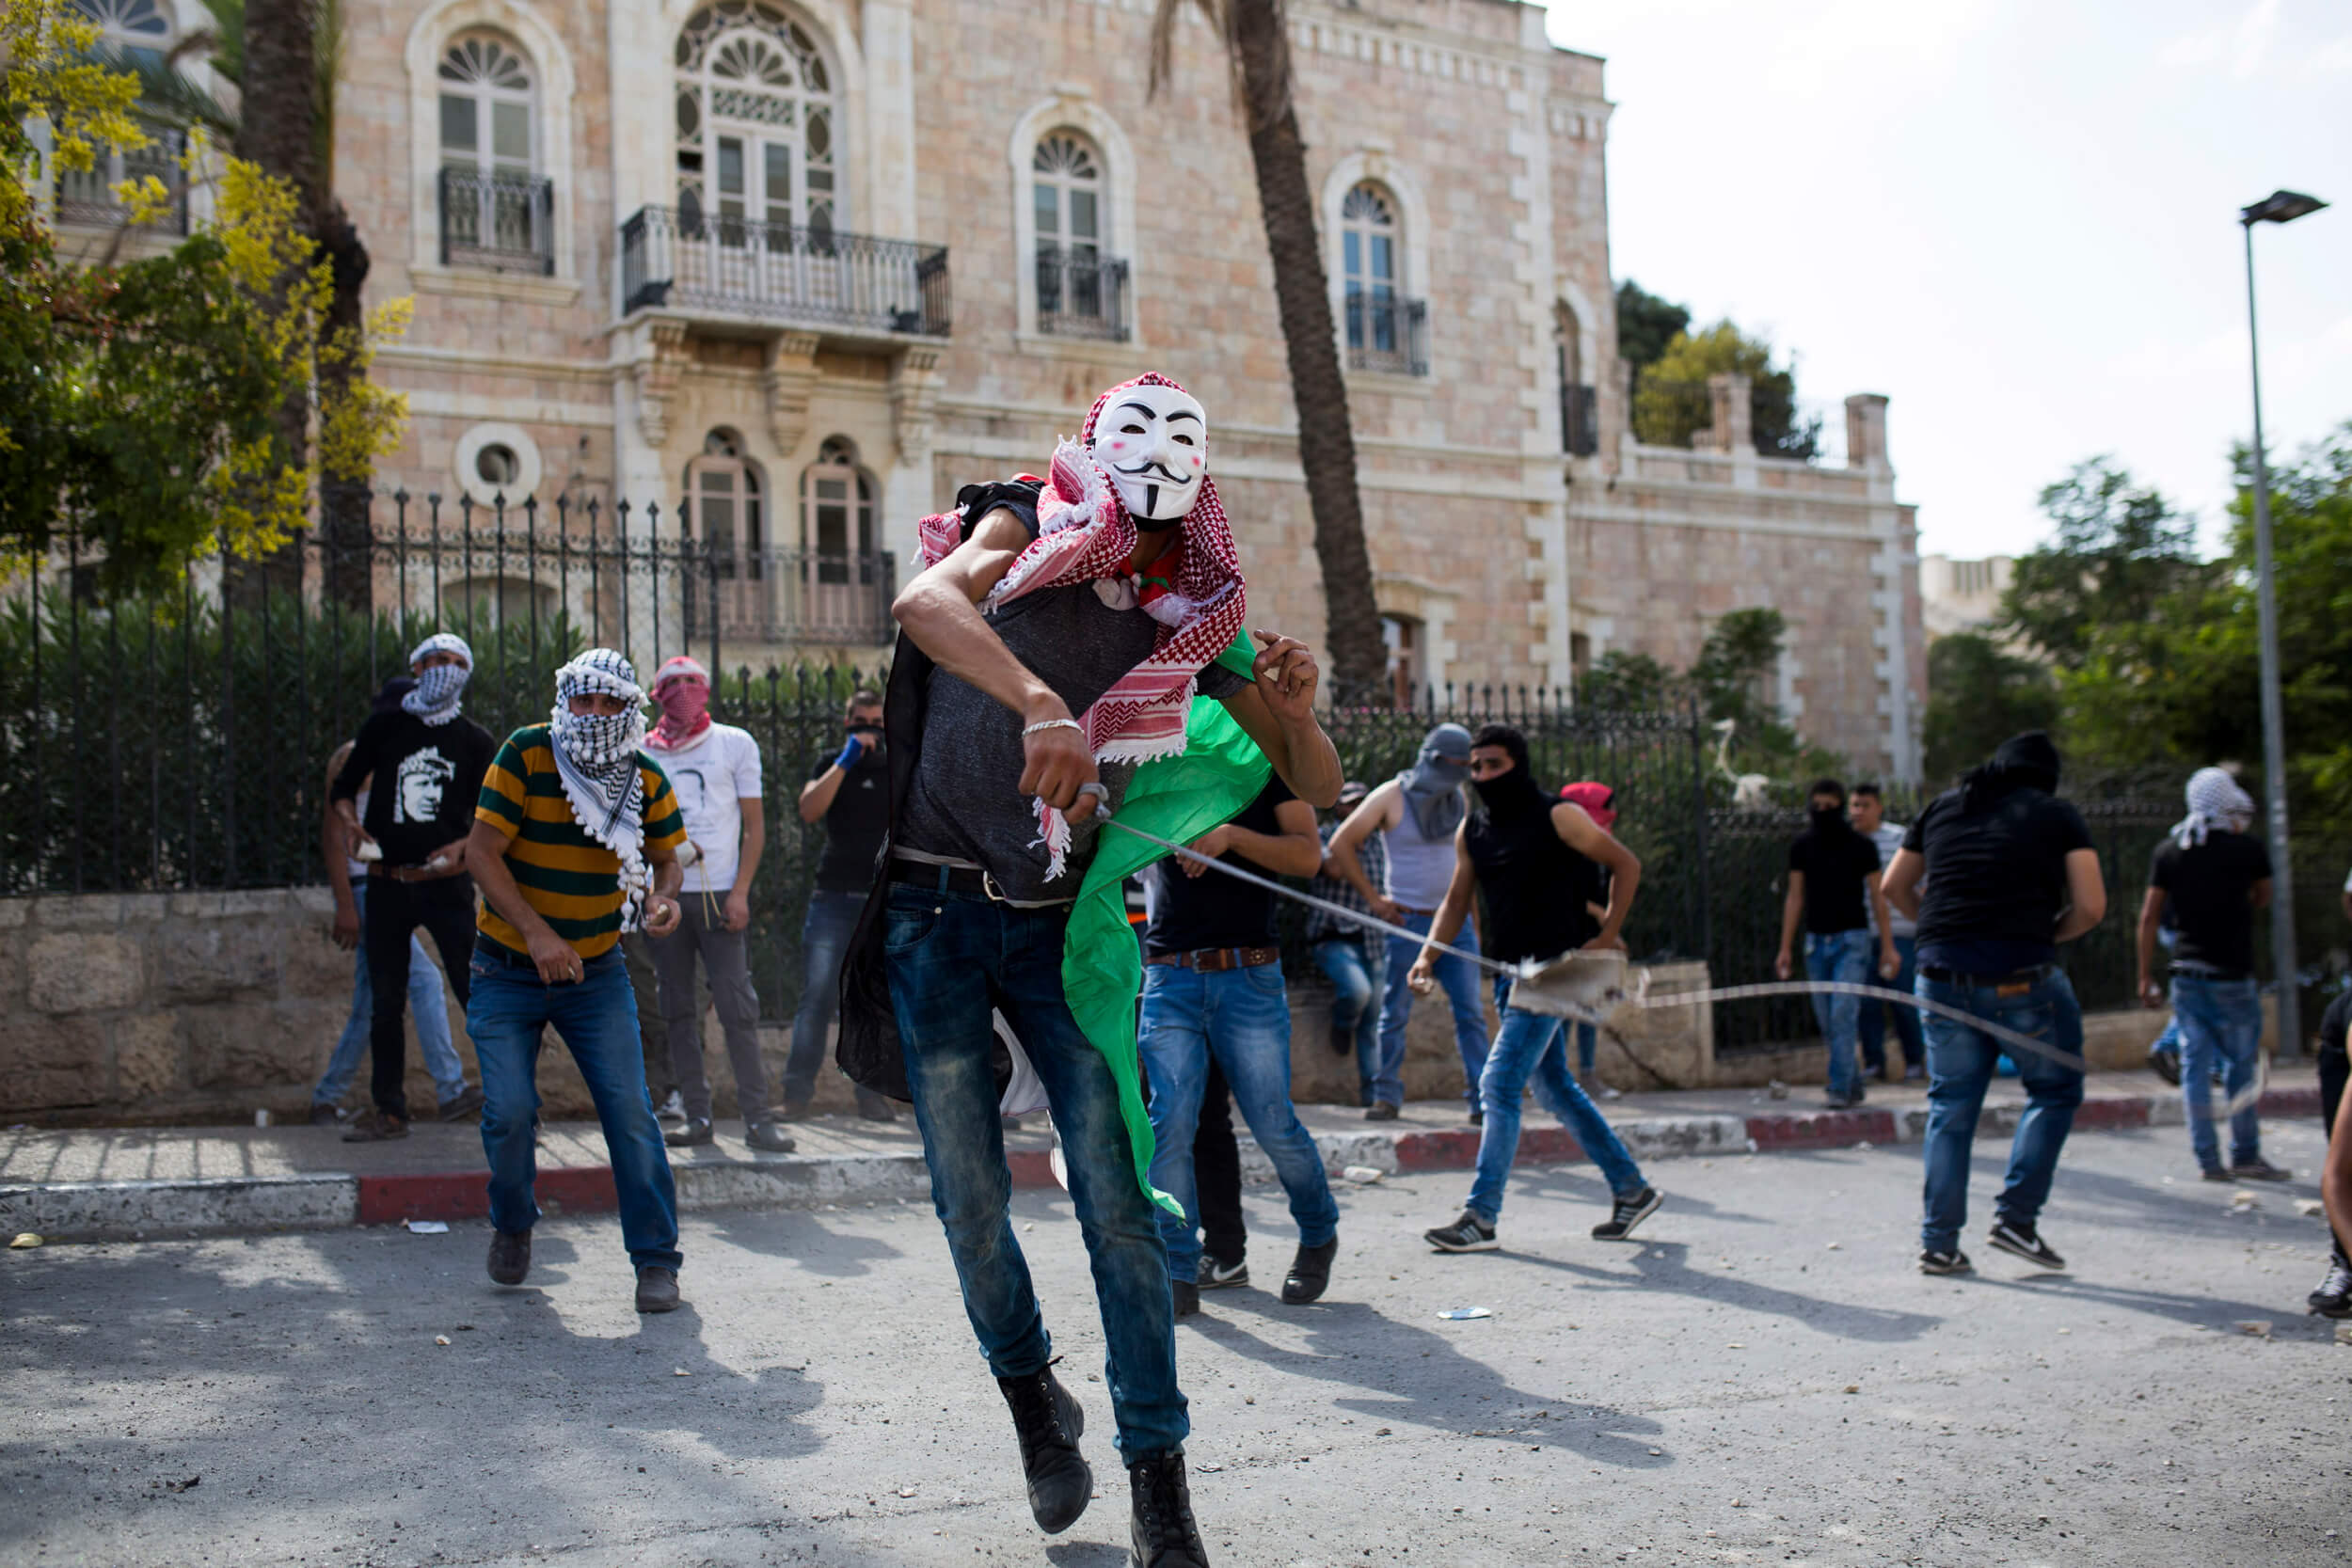 The funeral were followed by clashes in front of the Separation Wall inside Bethlehem city. (Photo: Anne Paq)